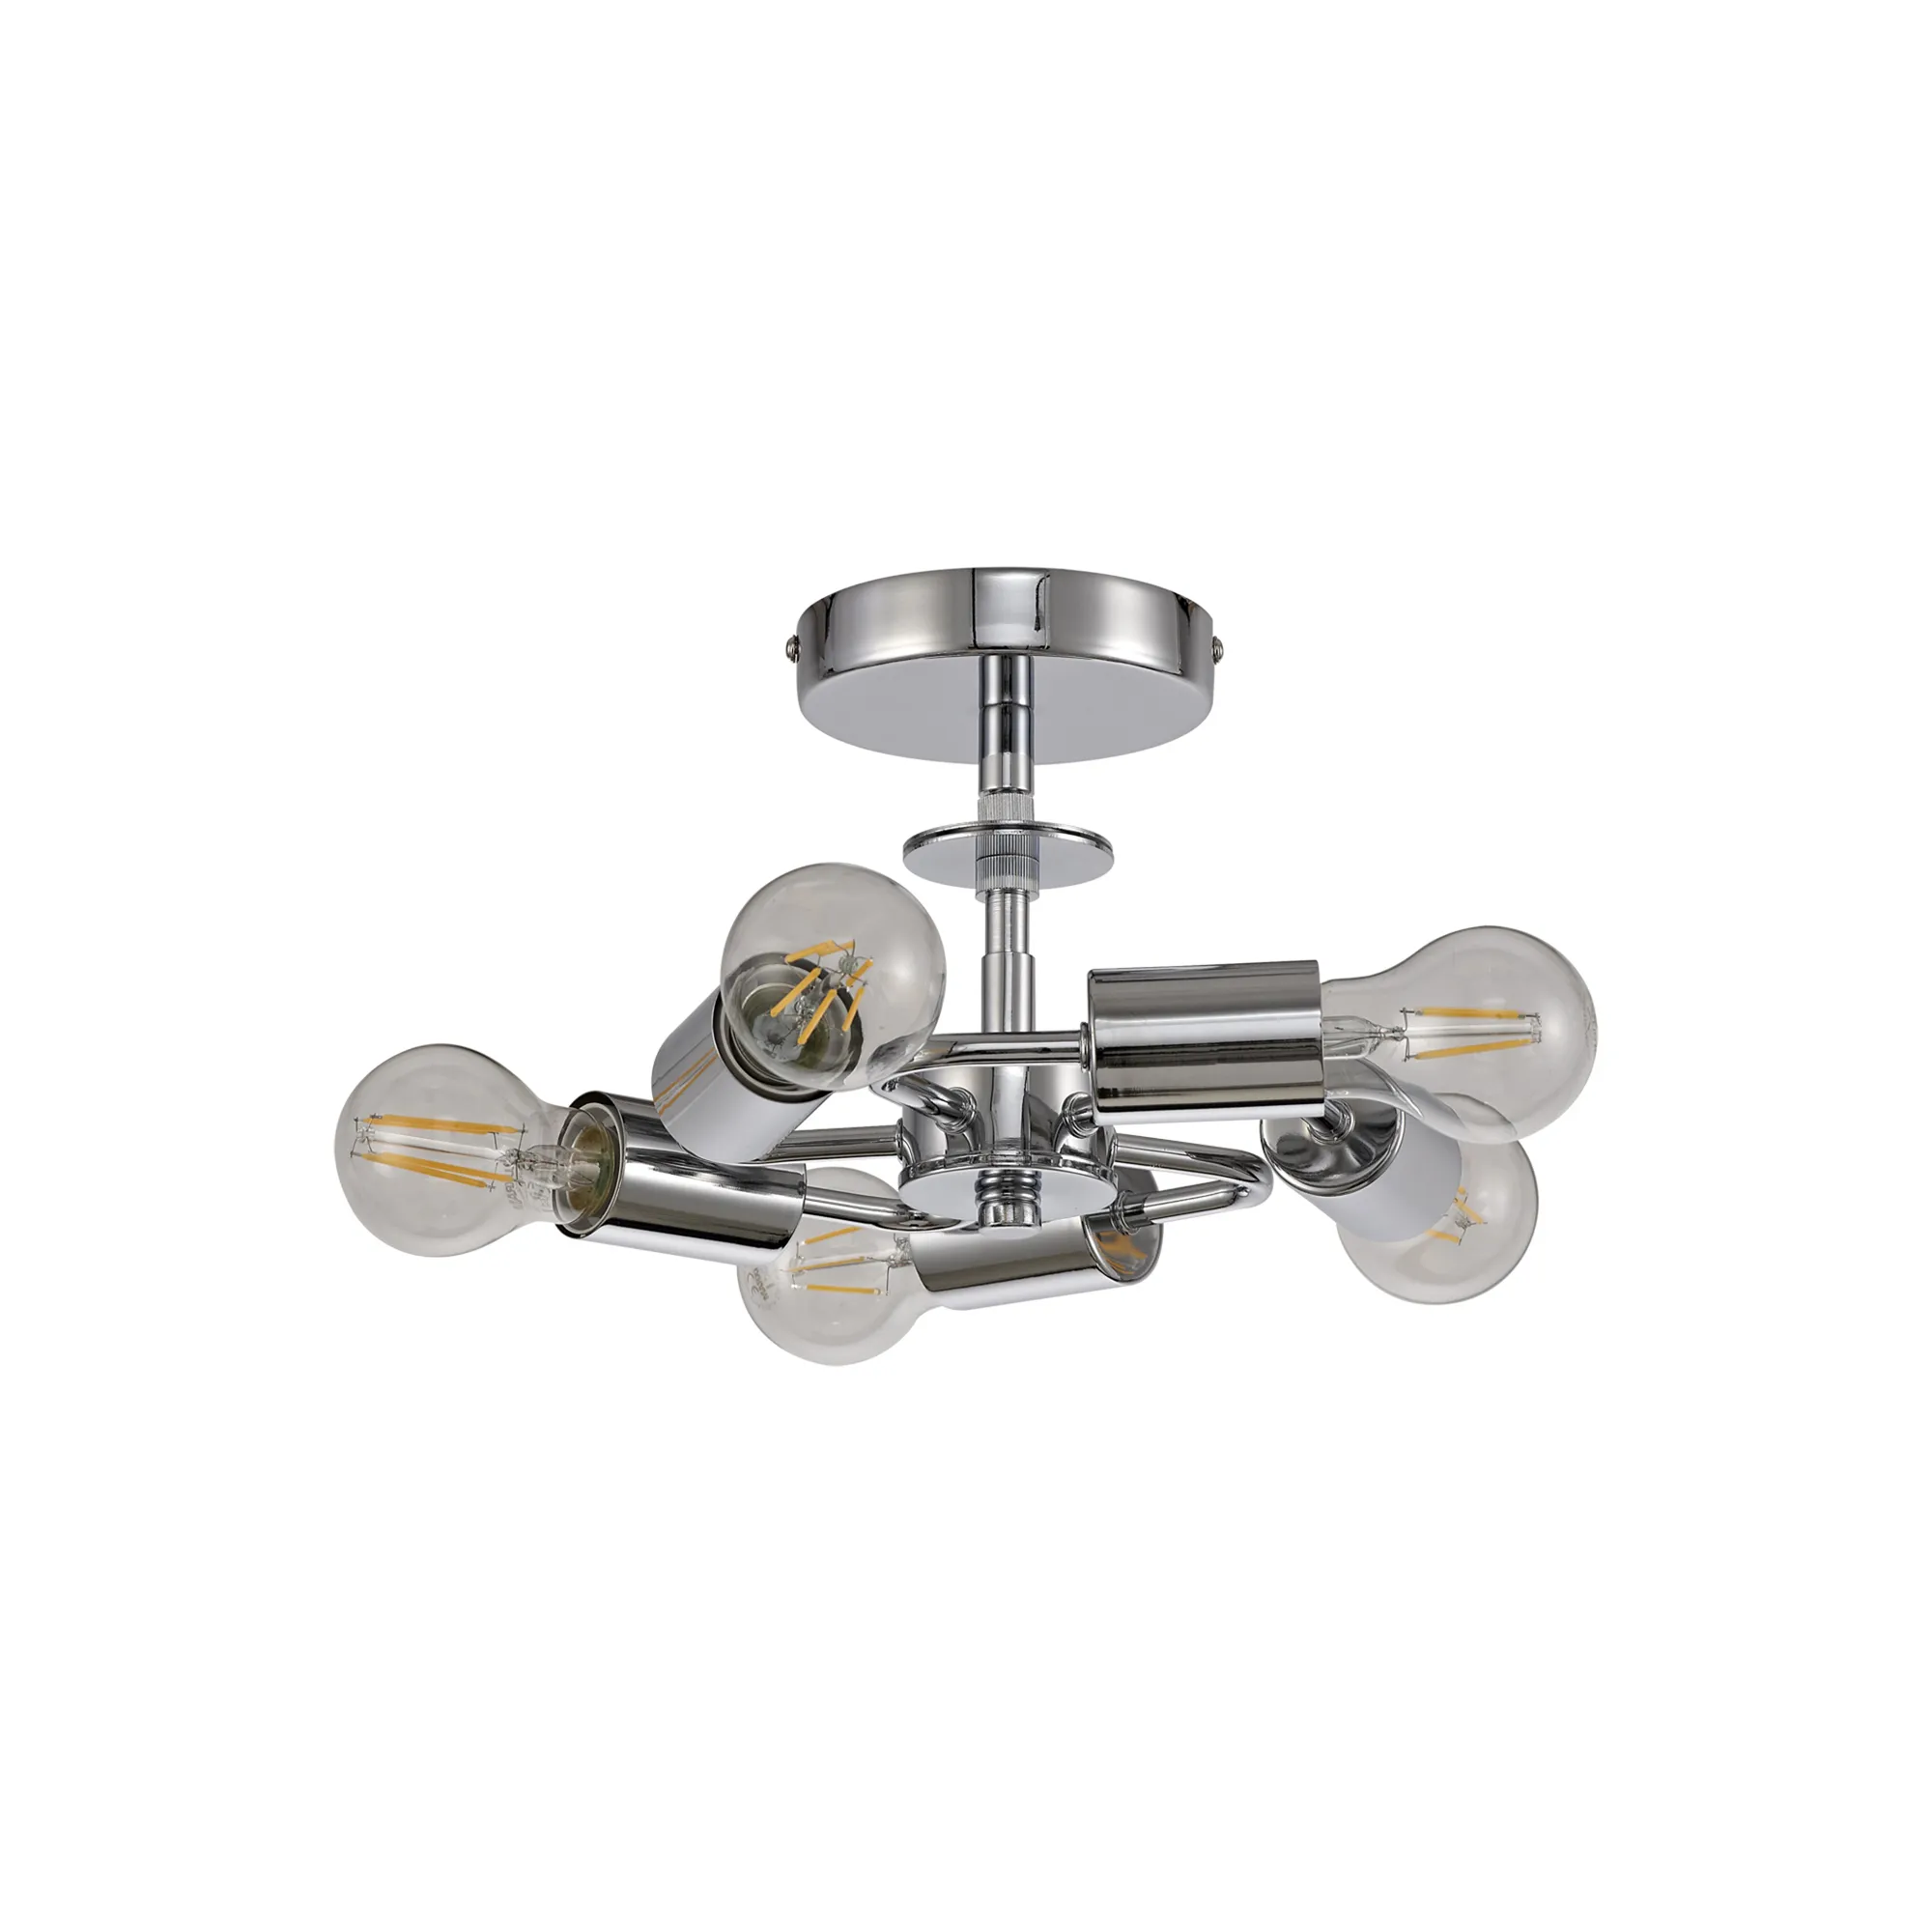 Baymont 60cm, Drop Flush 5 Light Polished Chrome, Taupe/Halo Gold, Frosted Diffuser DK0491  Deco Baymont CH TA